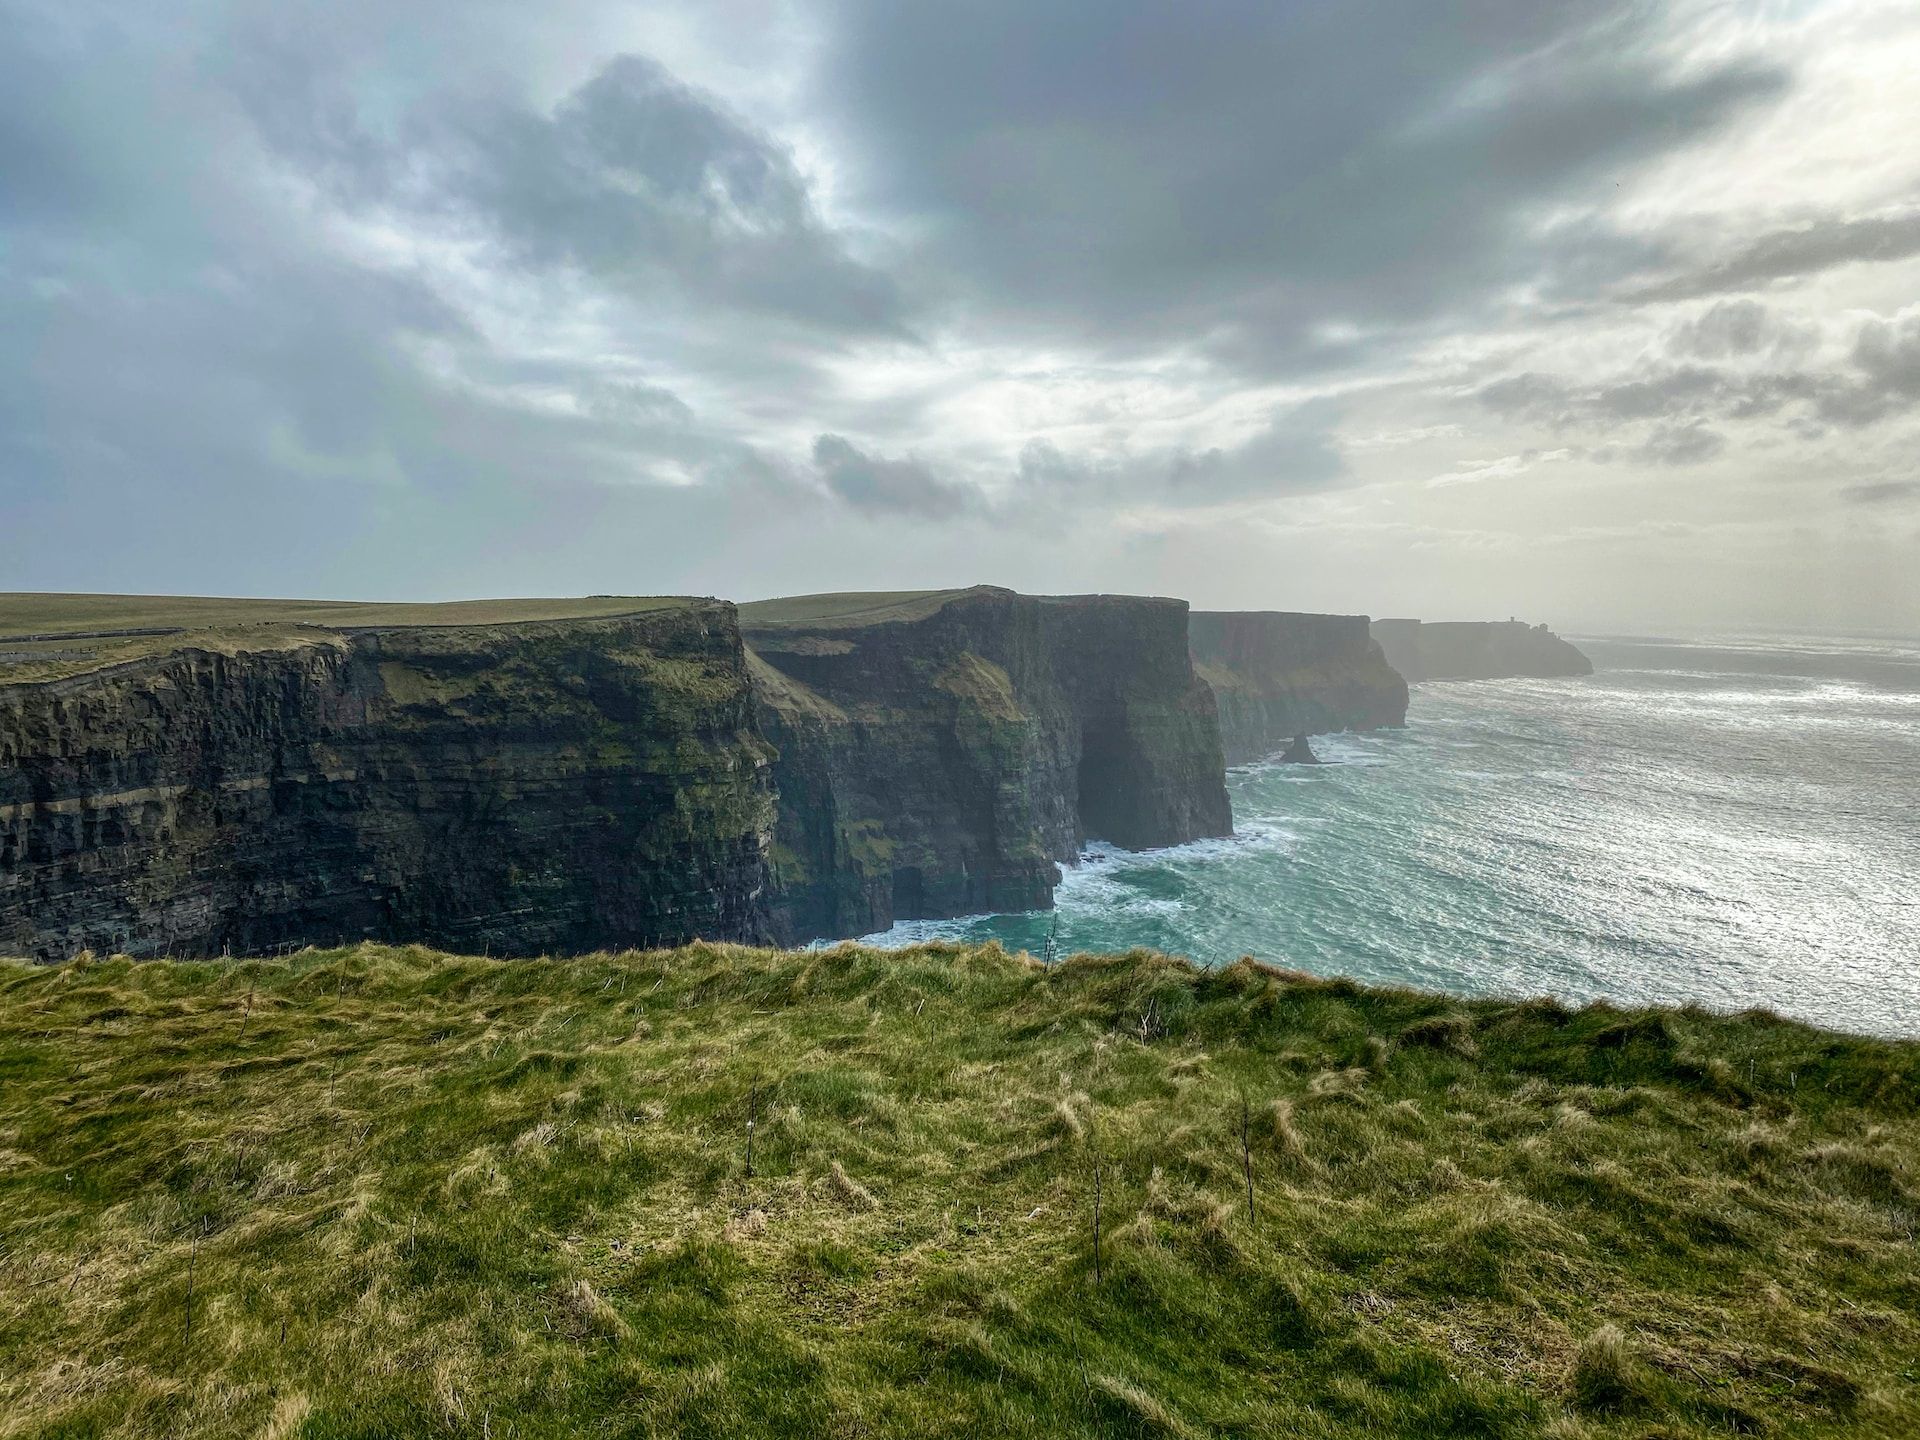 Flat and grassy cliffs during a cloudy day